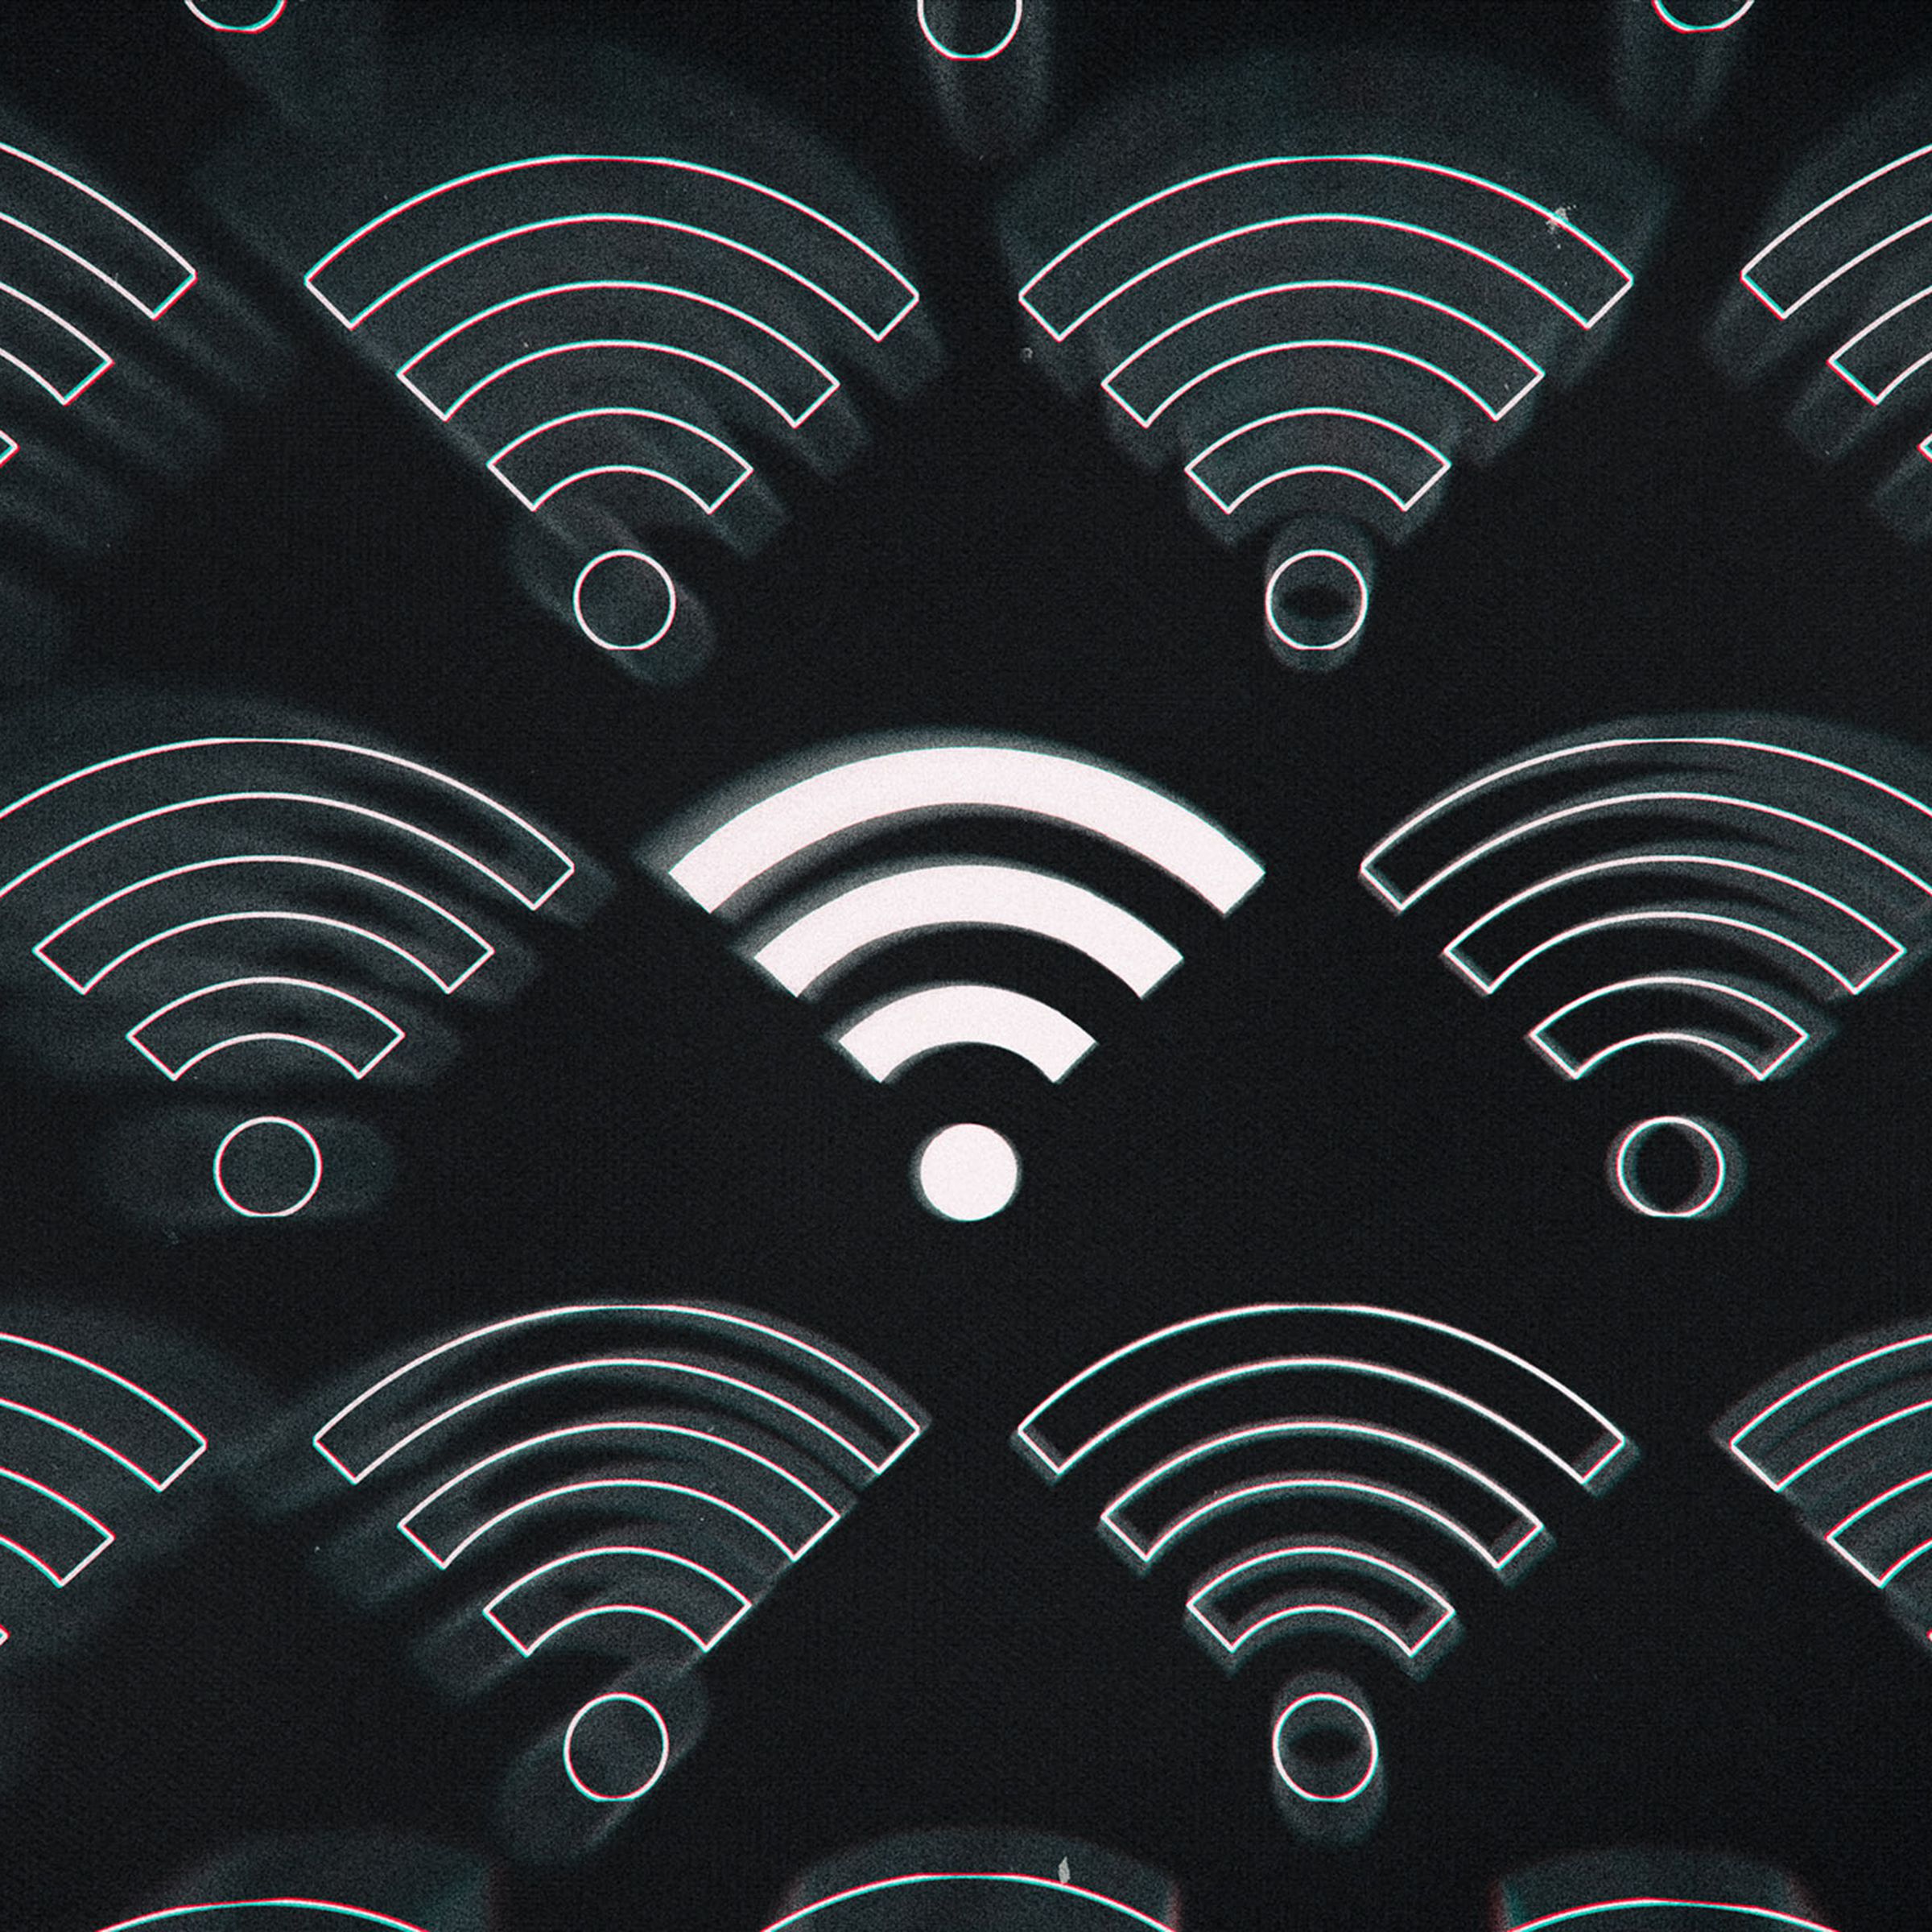 Illustration of several Wi-Fi symbols, one filled in with white, the others just outlines.